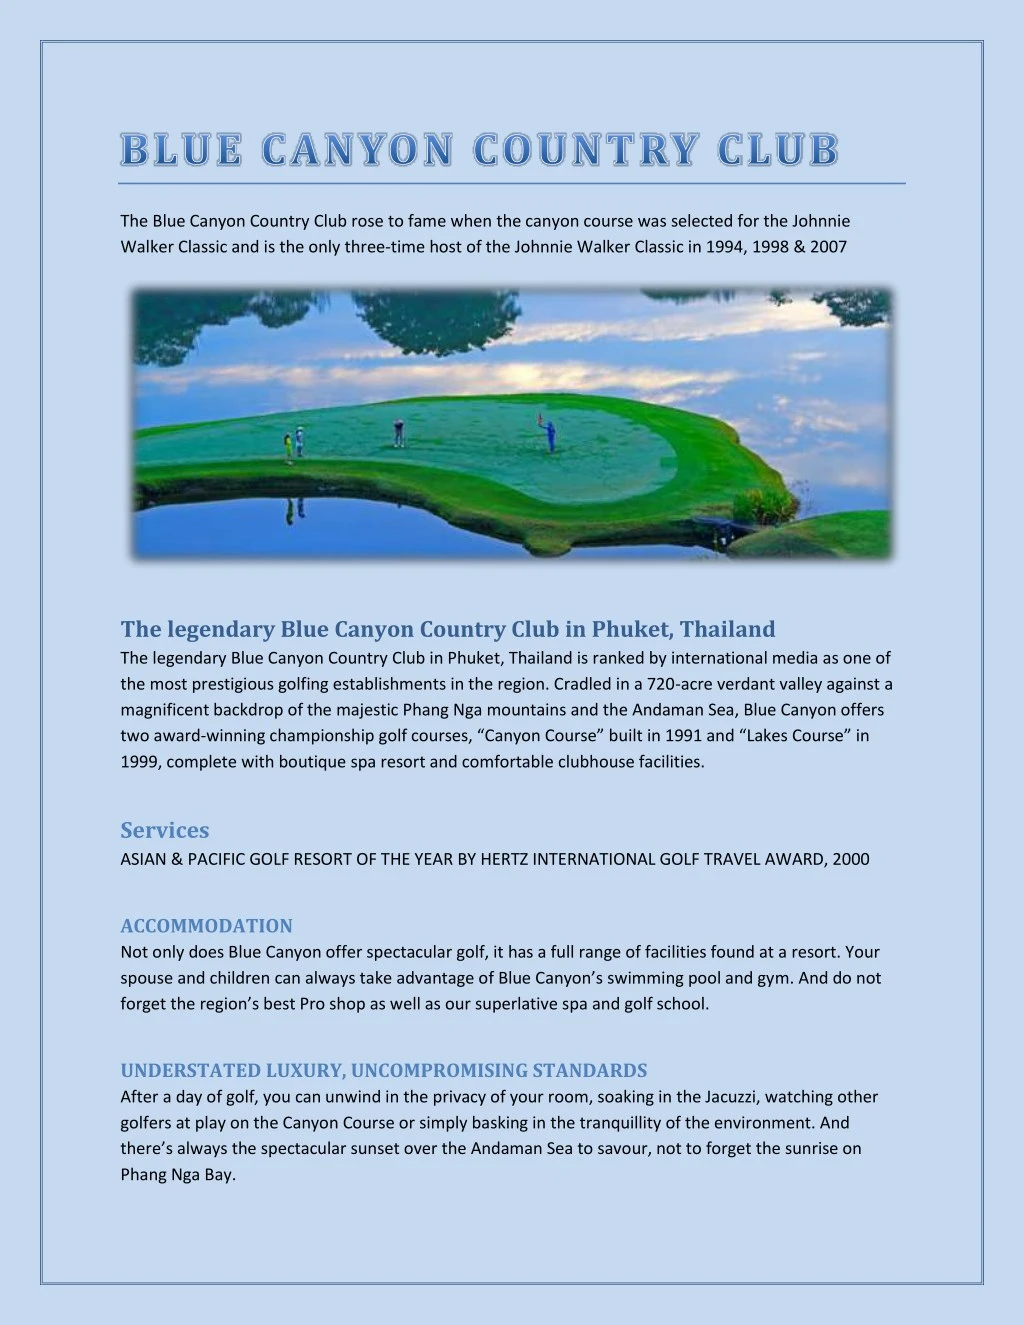 the blue canyon country club rose to fame when